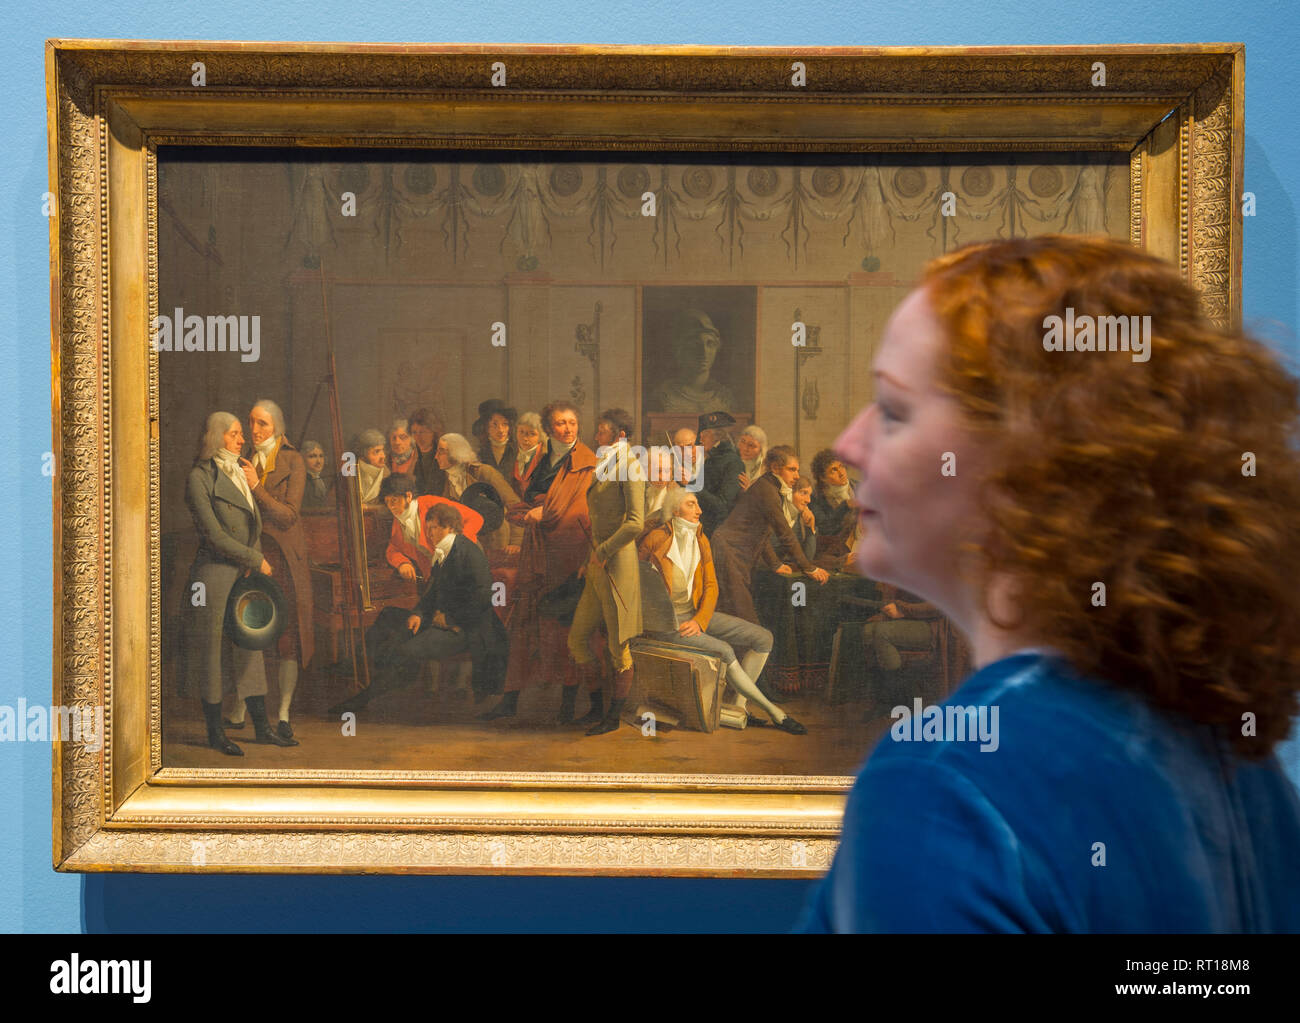 National Gallery, London, UK. 27th Feb, 2019. Paintings by Louis-Léopold Boilly show life in politically turbulent Paris during the French Revolution, the Napoleonic era and subsequent Restoration of the Monarchy. Image: The Meeting of Artists in Isabey's Studio, 1798. Paris, Musée du Louvre, Department of Paintings, Legs Biesta-Monrival, 1901. Credit: Malcolm Park/Alamy Live News Stock Photo